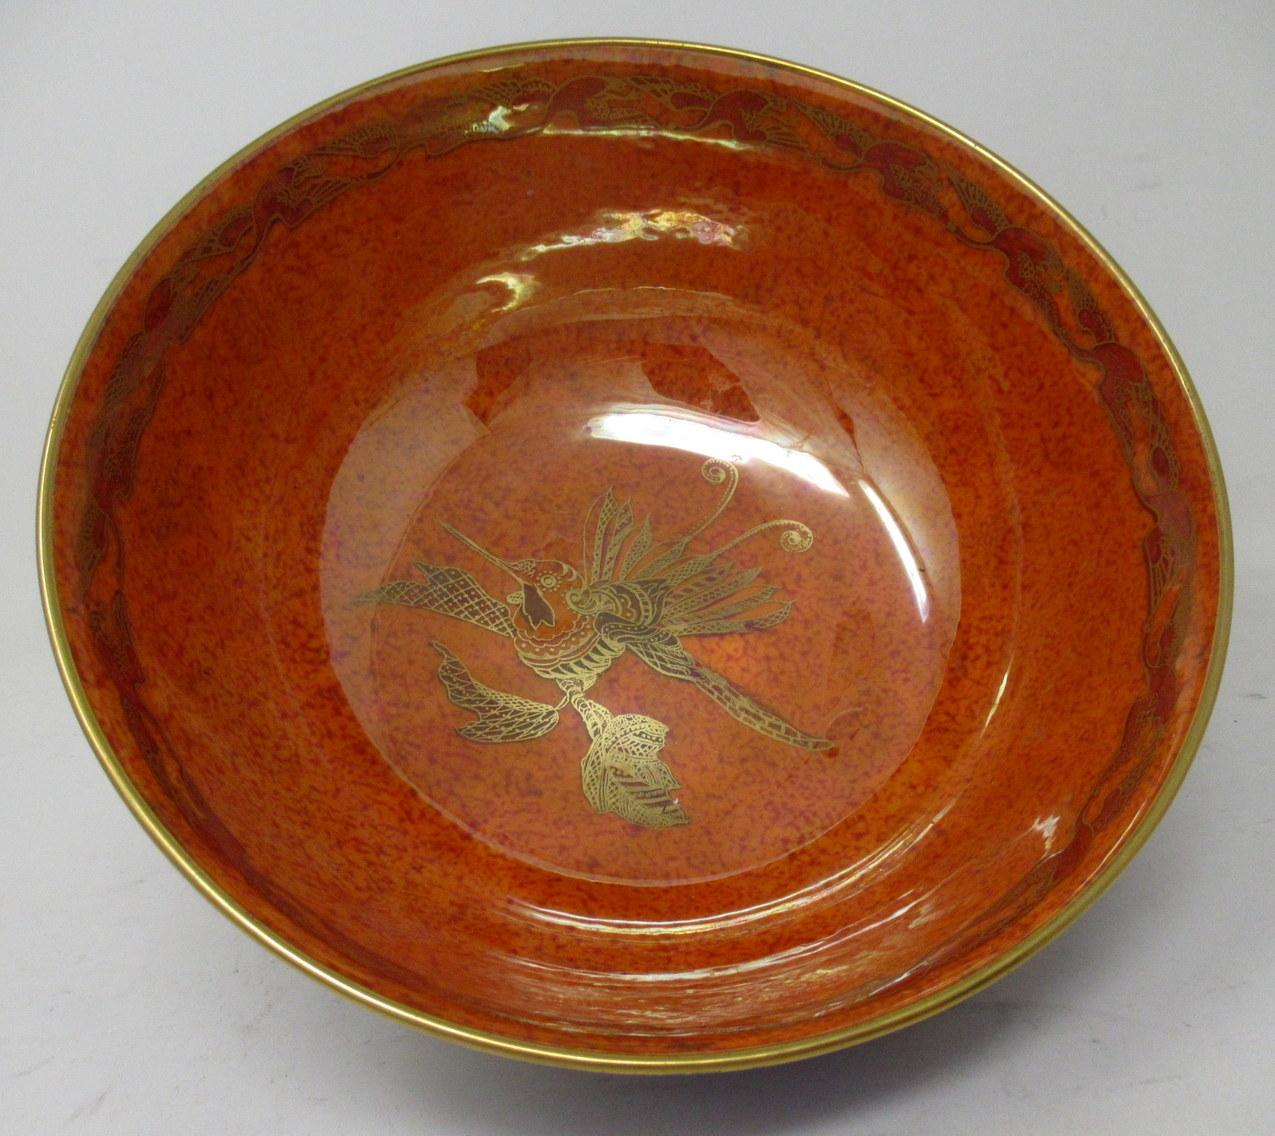 Art Deco Wedgwood Celestial Chinese Dragon Lustre Ware Bowl Centerpiece, 1920s 4